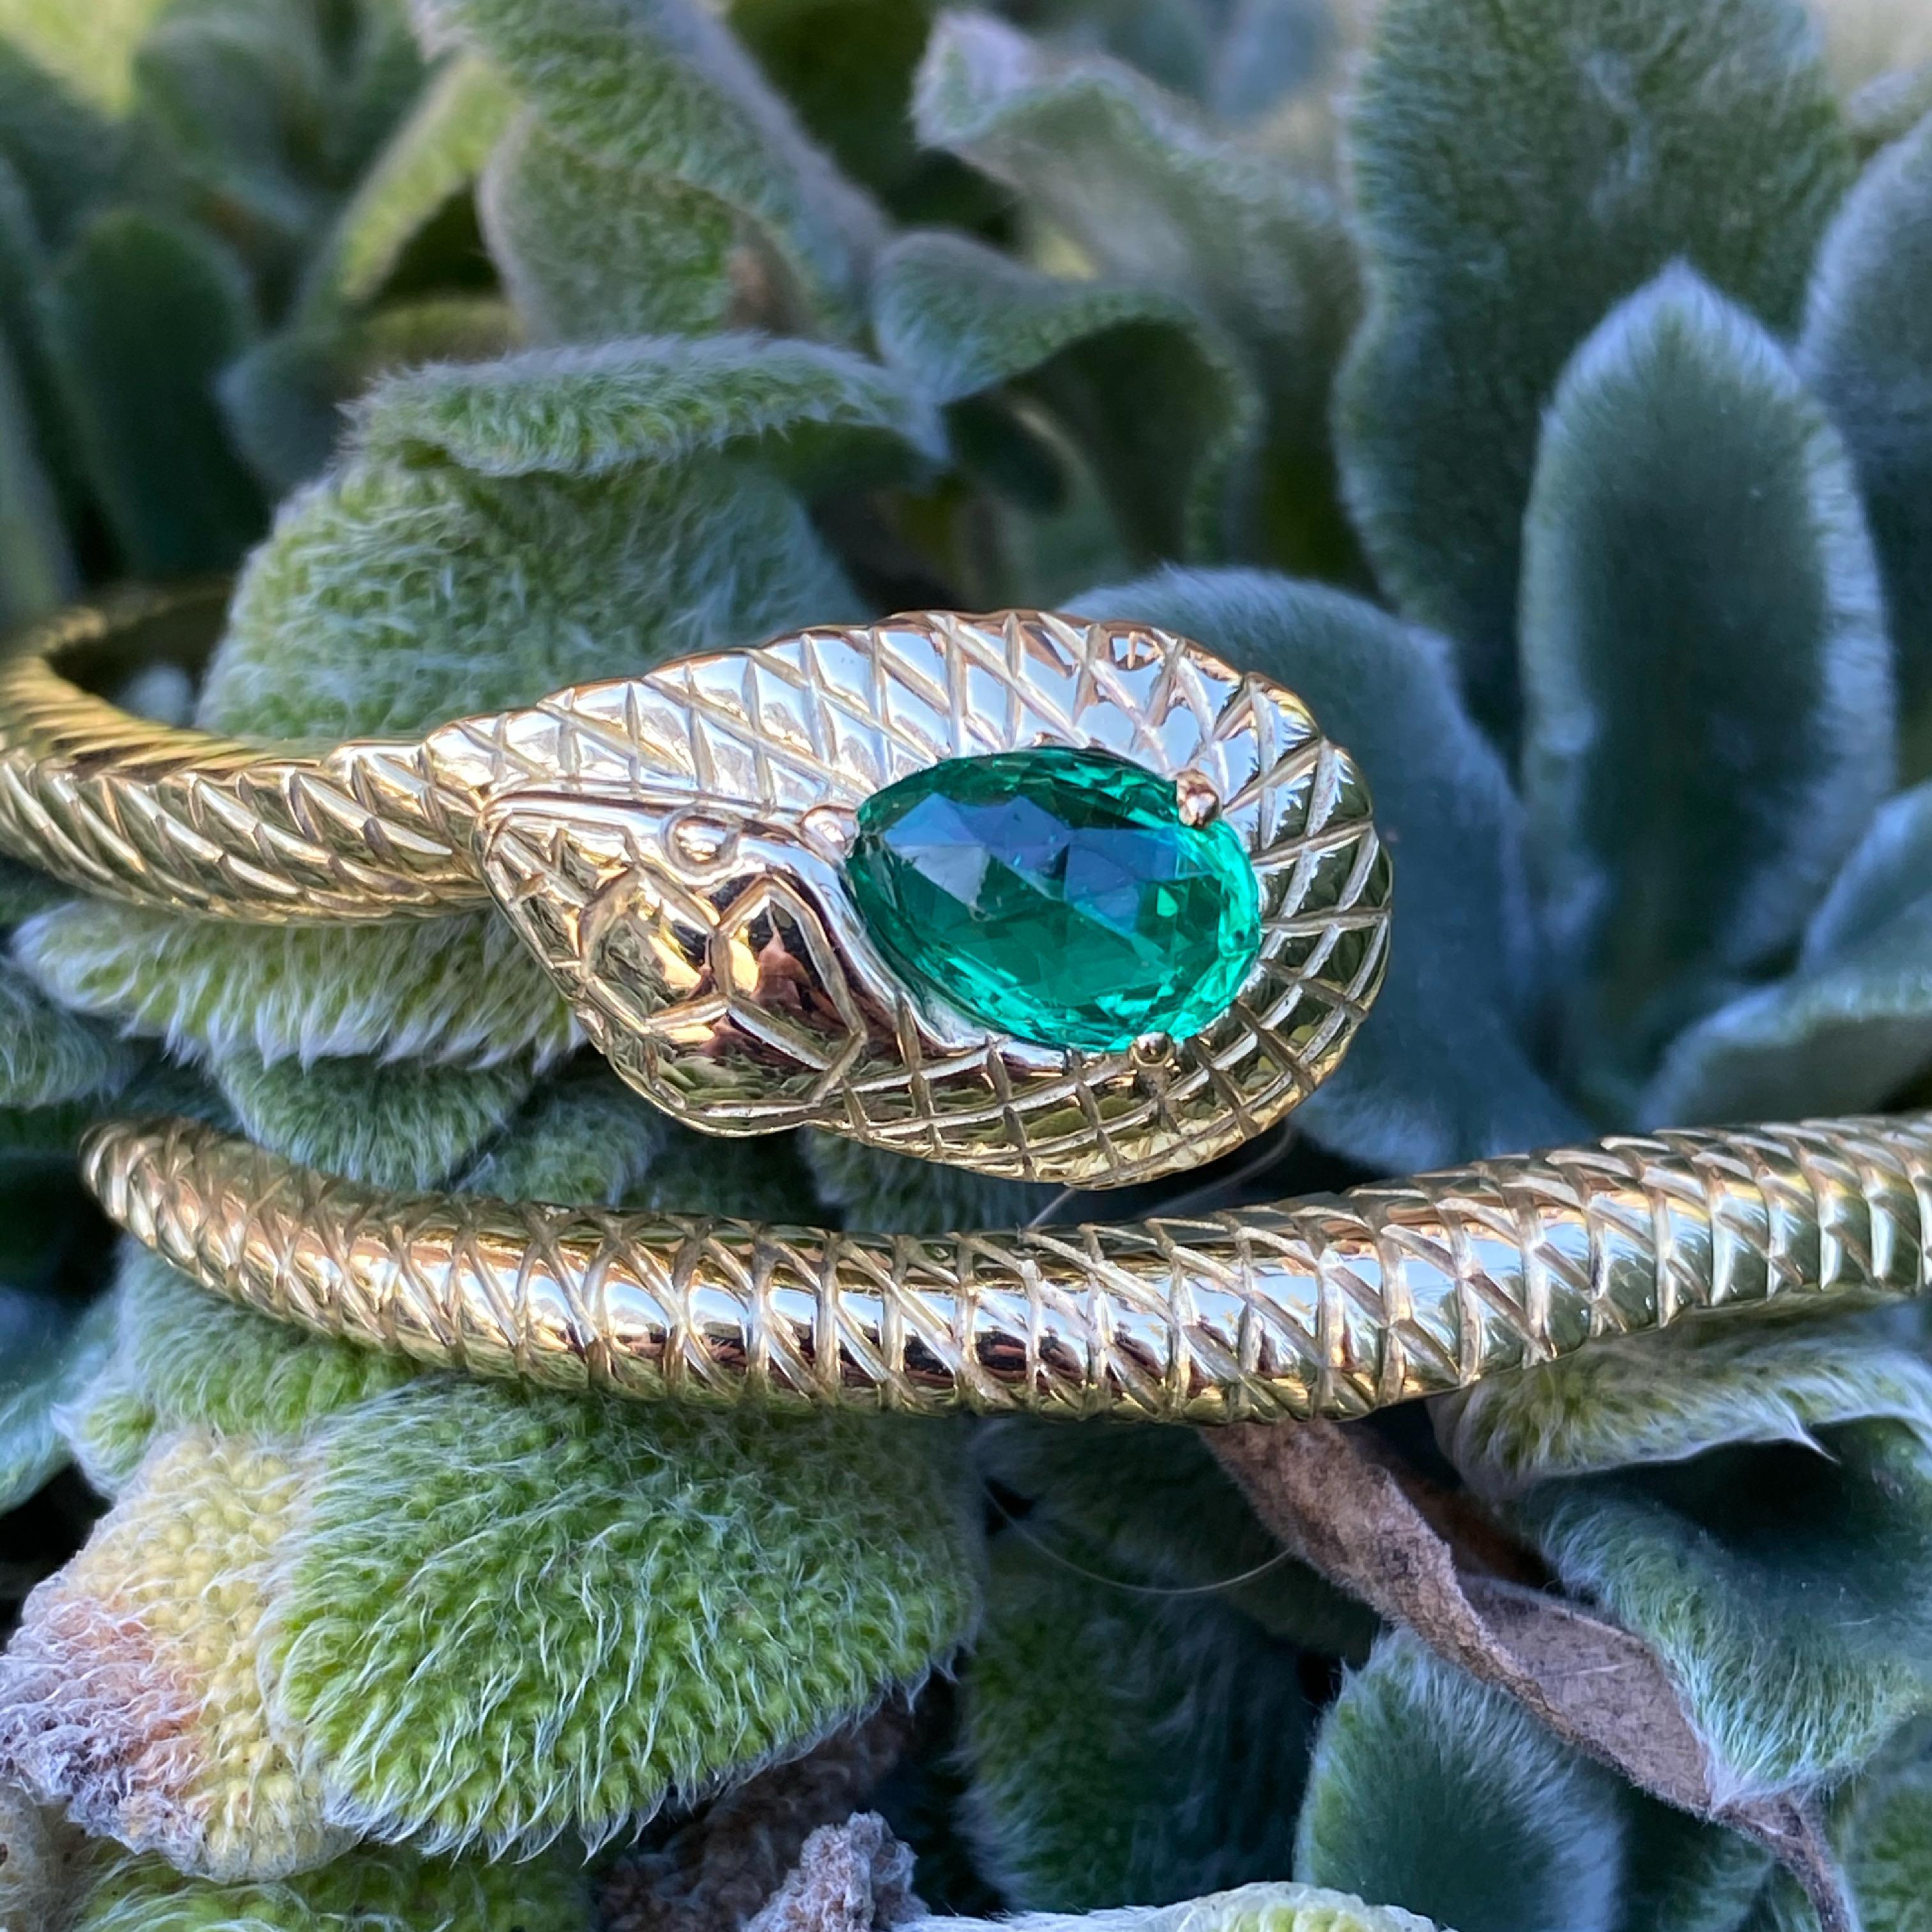 This solid gold bracelet was hand carved in Paris by a master jeweler and set with a 1.97 carat AGL certified antique no treatment Colombian emerald. It fits a medium to large wrist and can be worn higher on the forearm for smaller sizes, such as